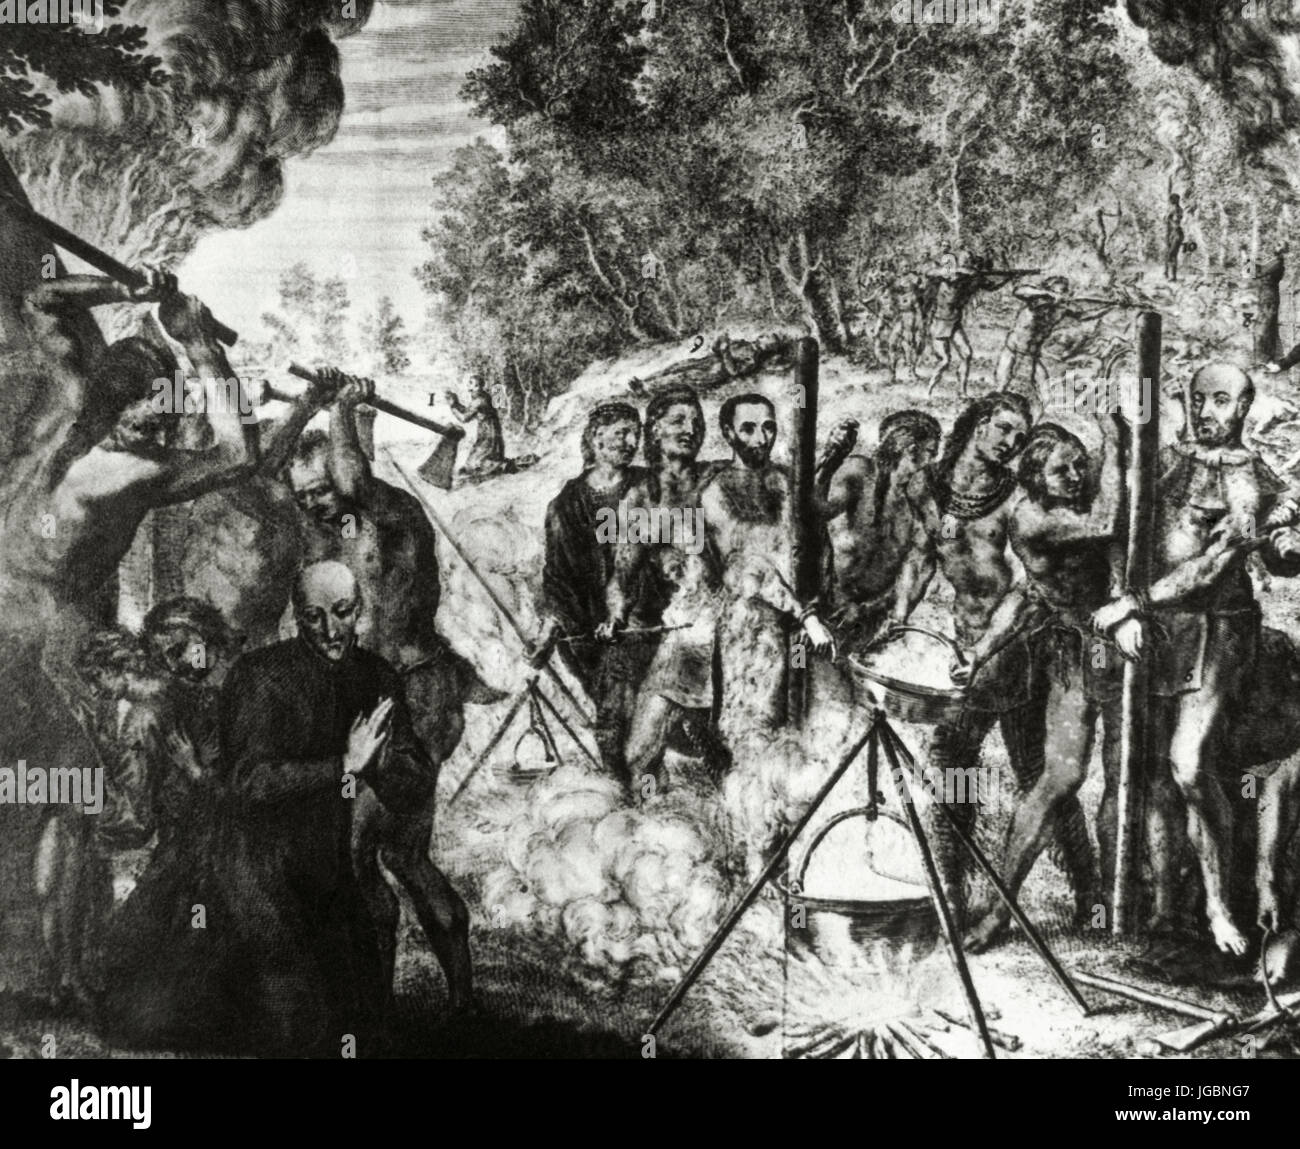 Jesuit missionaries martyred by indigenous people. Engraving. Stock Photo